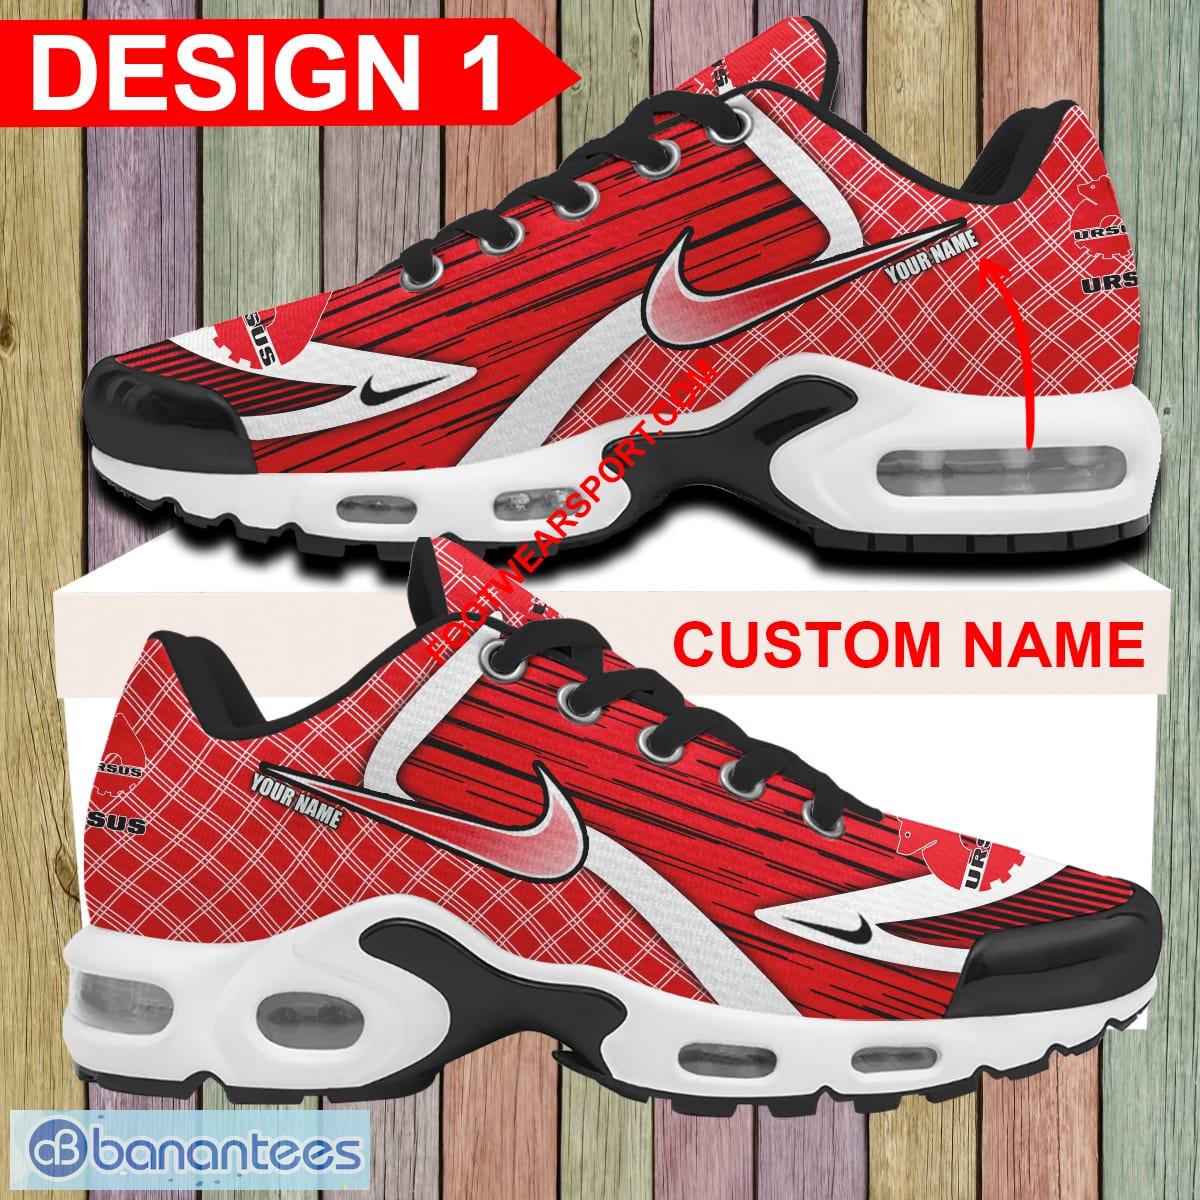 Custom Name Ursus SA Car Racing Air Cushion Sport Shoes TN Sneakers For Fans Sneakers Gift - Ursus SA Car Racing Air Cushion Sport Shoes Style 1 TN Sneakers